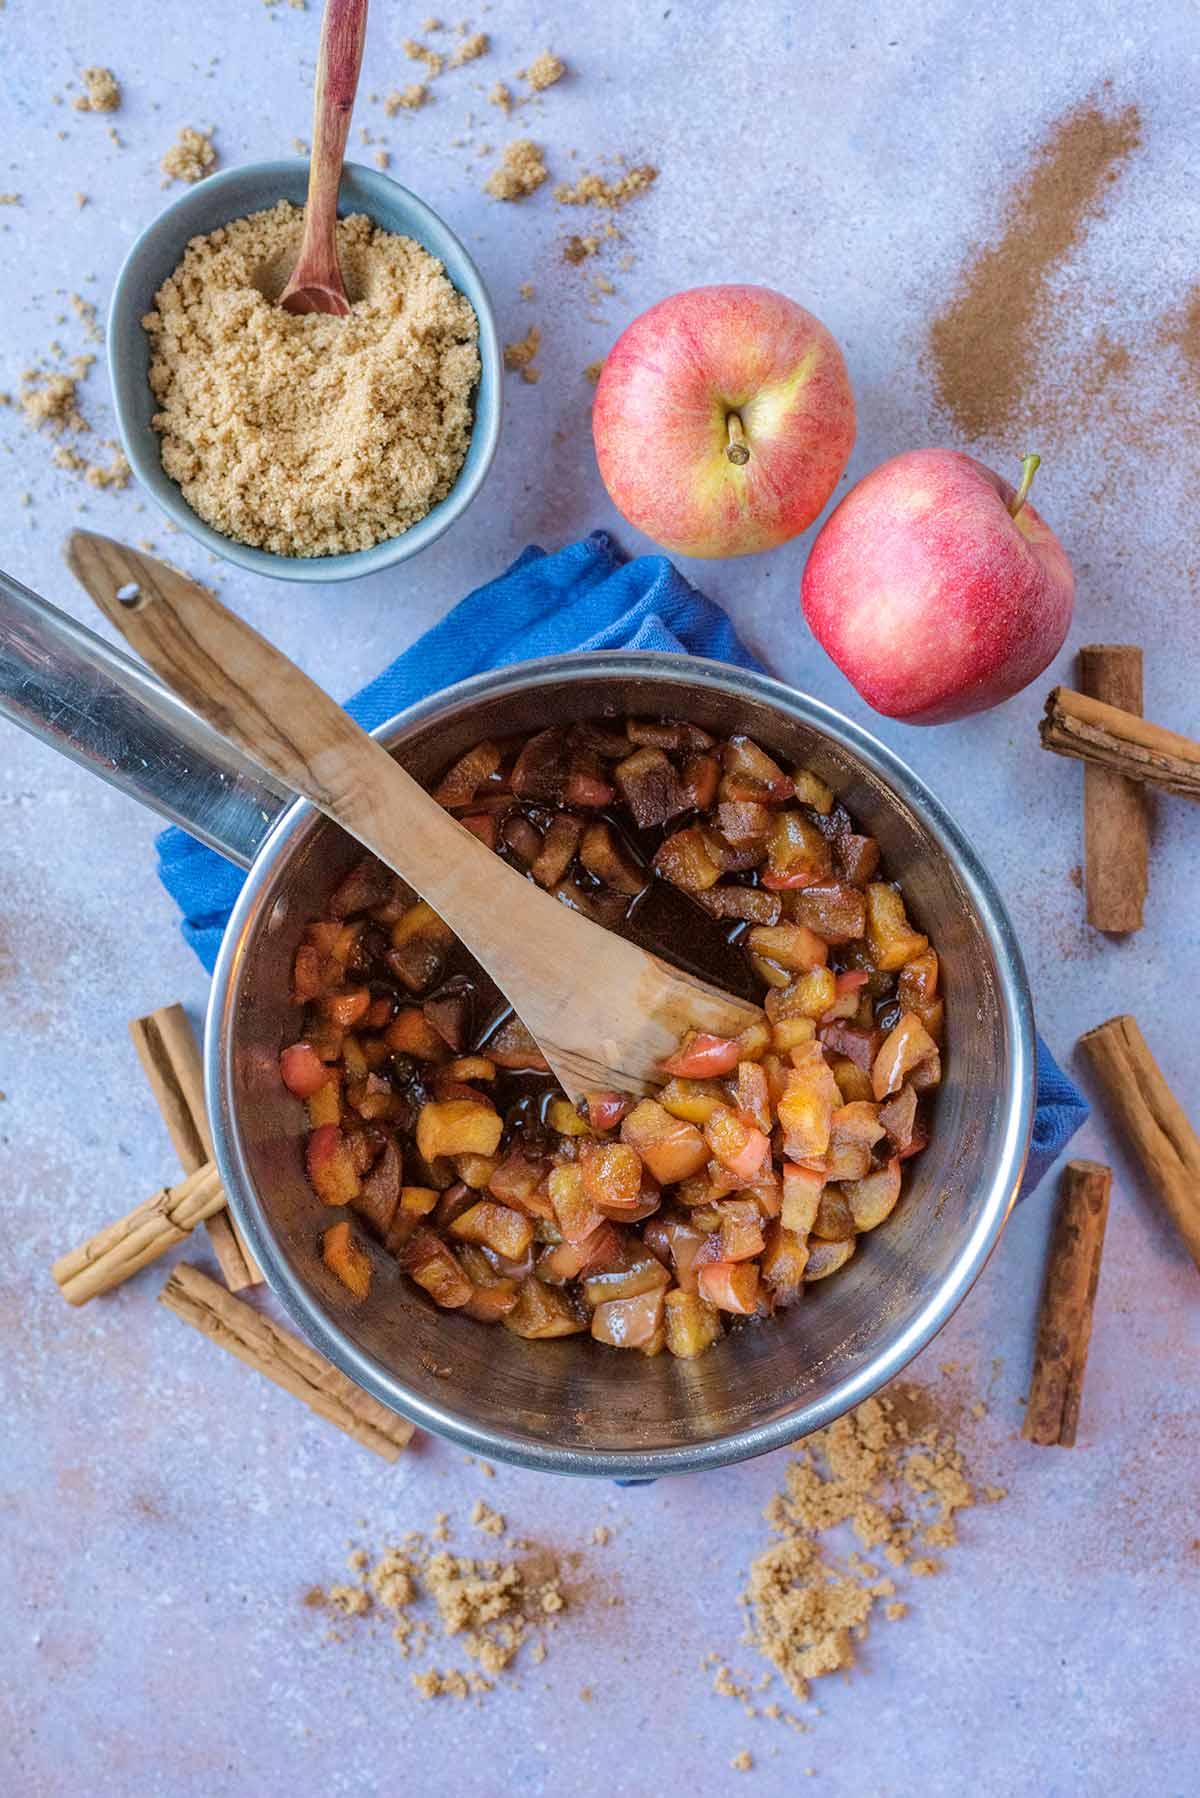 A saucepan containing stewed apples surrounded by apples and cinnamon sticks.